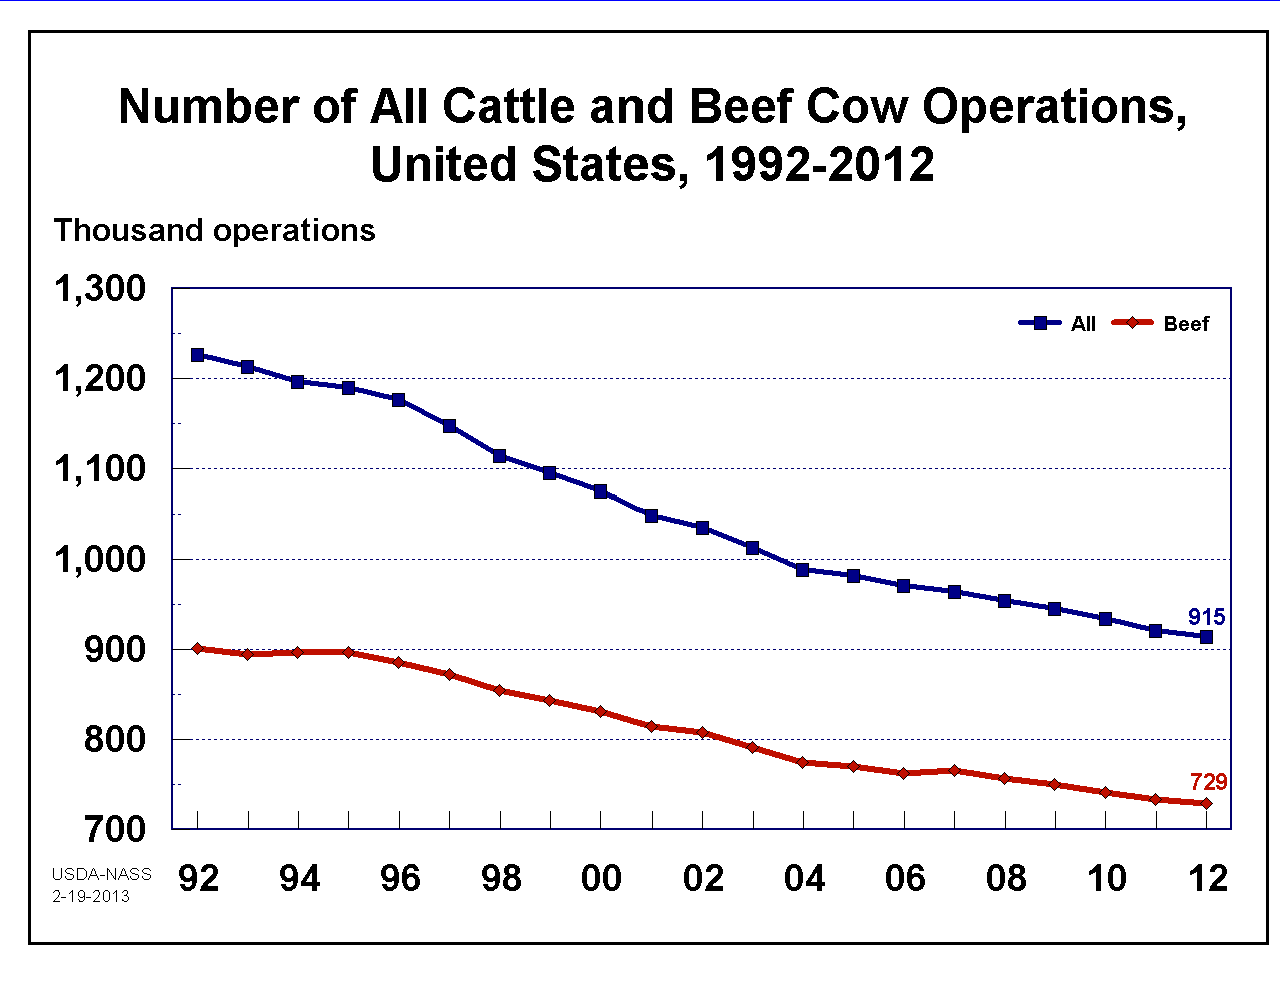 All Cattle & Beef Cows: Number of Operations by Year, US